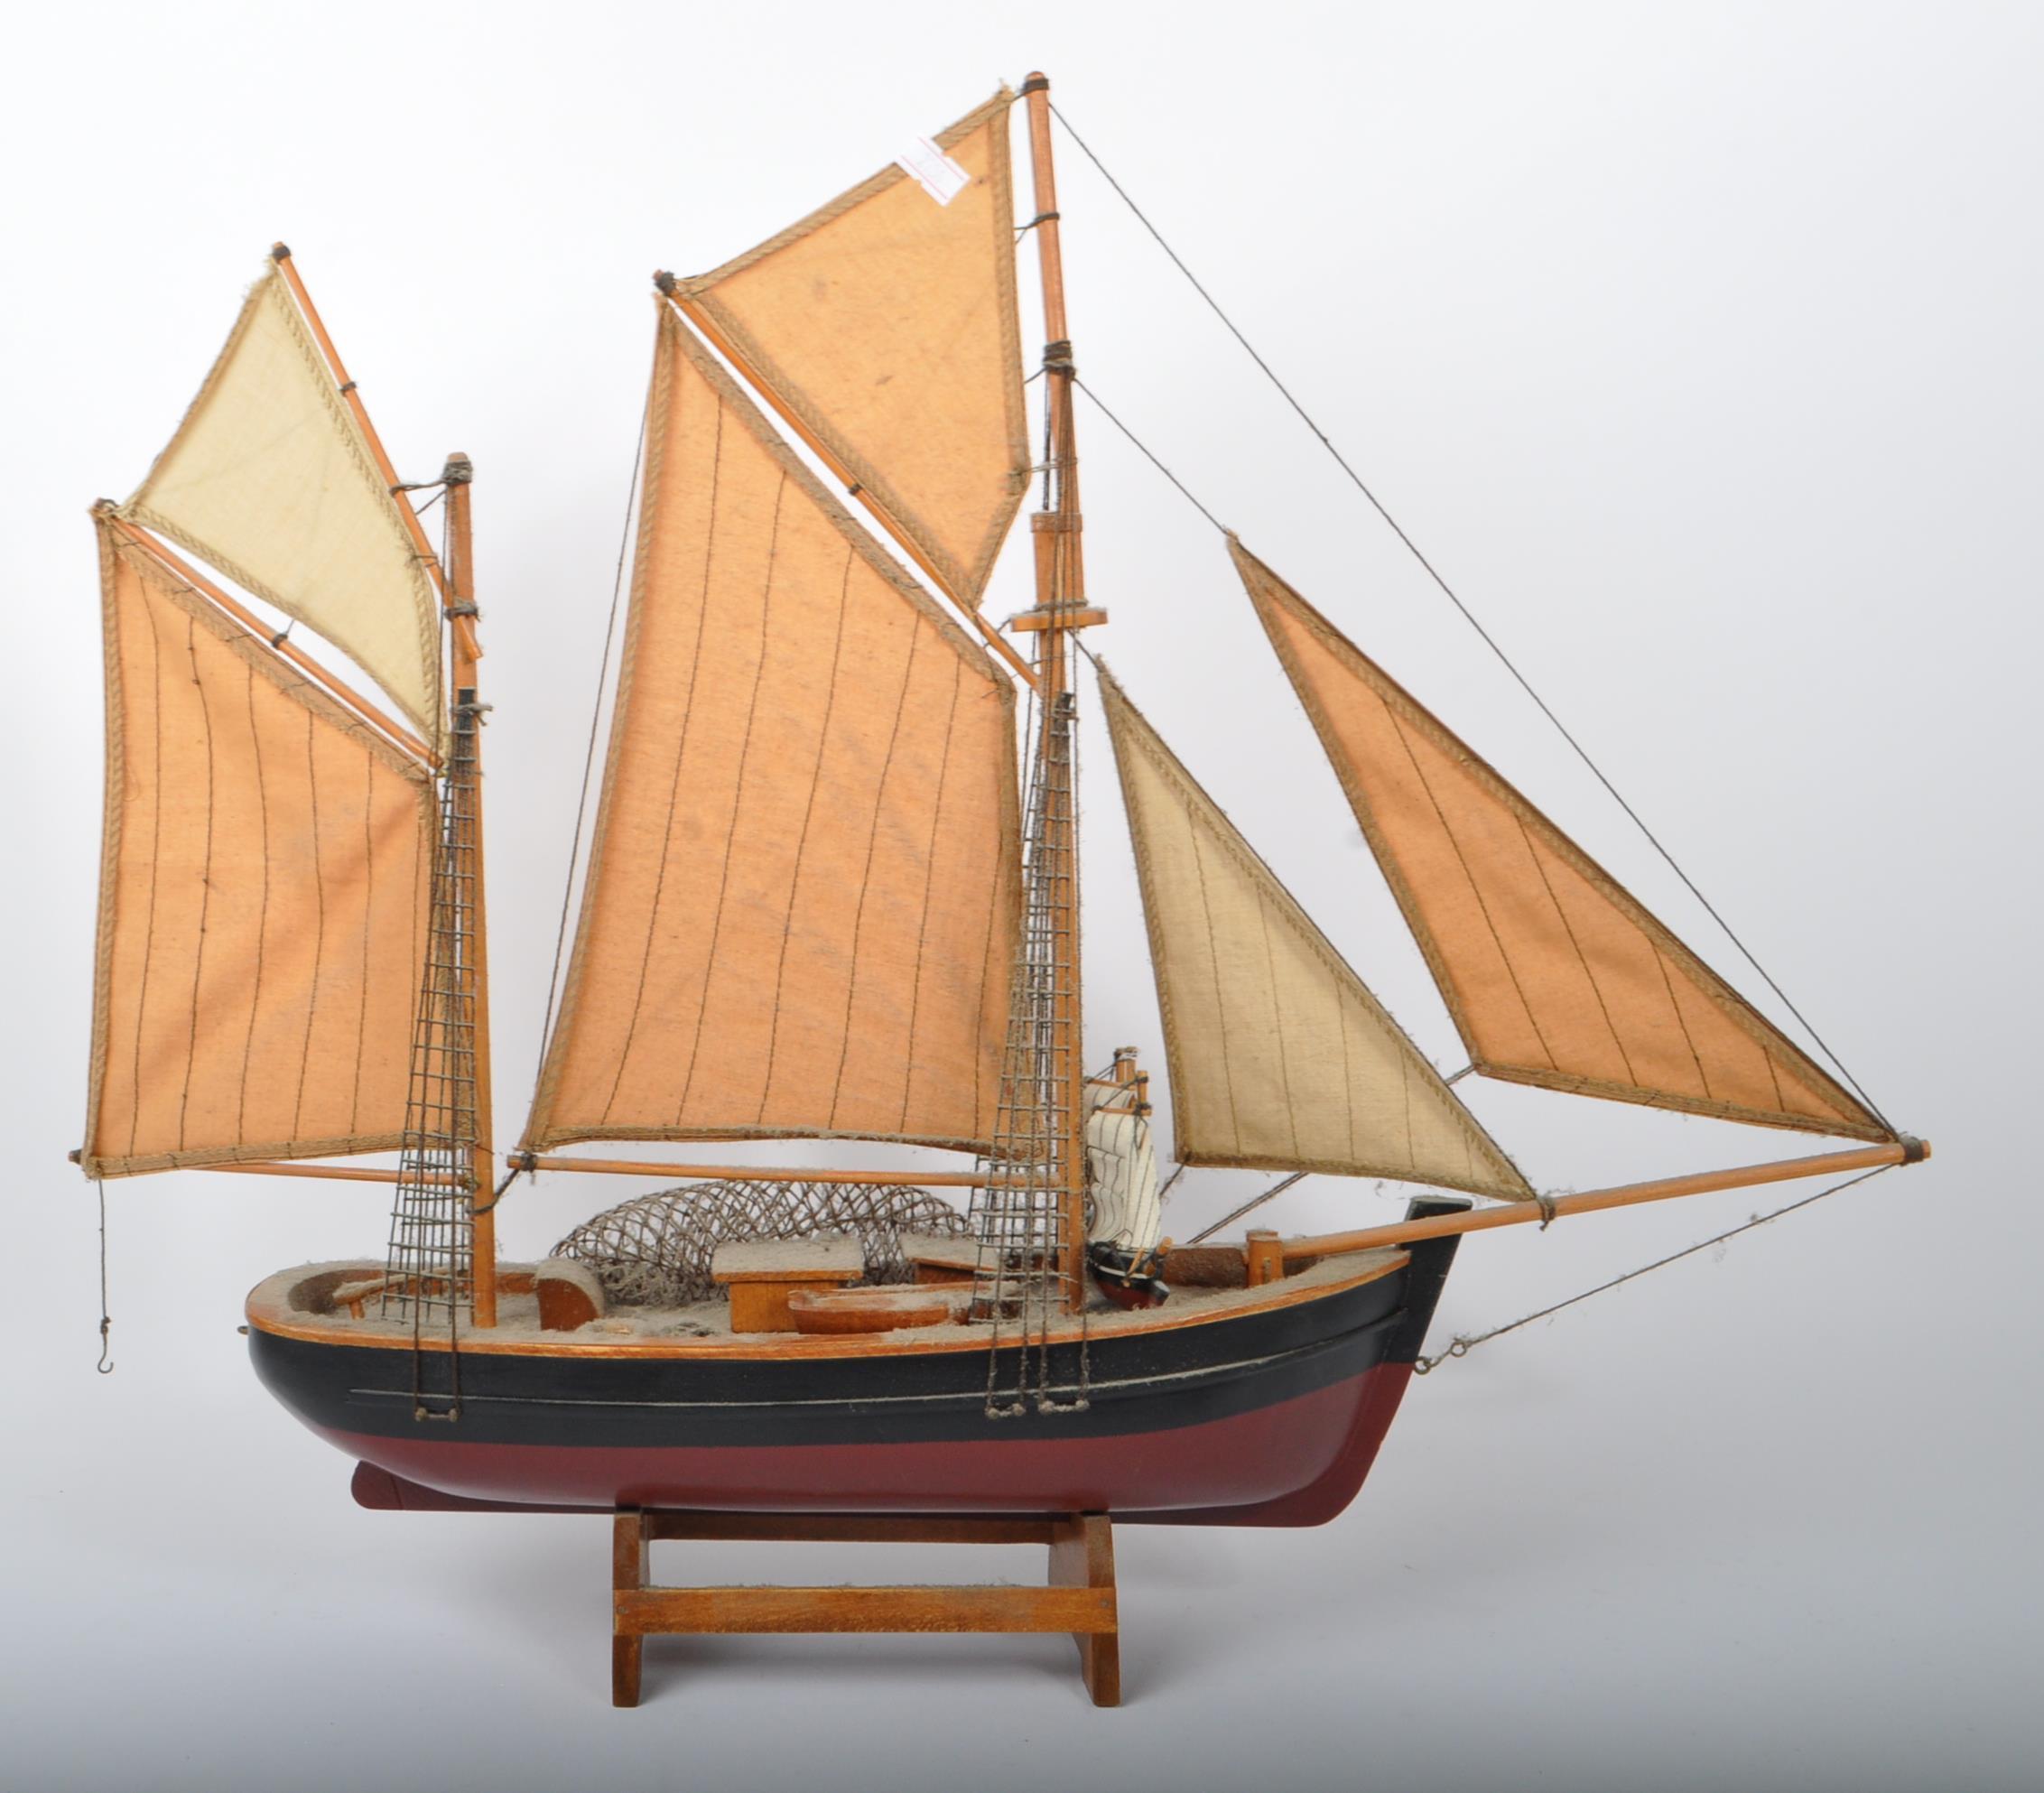 EARLY 20TH CENTURY WOODEN DISPLAY SAILING BOAT / YACHT - Image 7 of 7